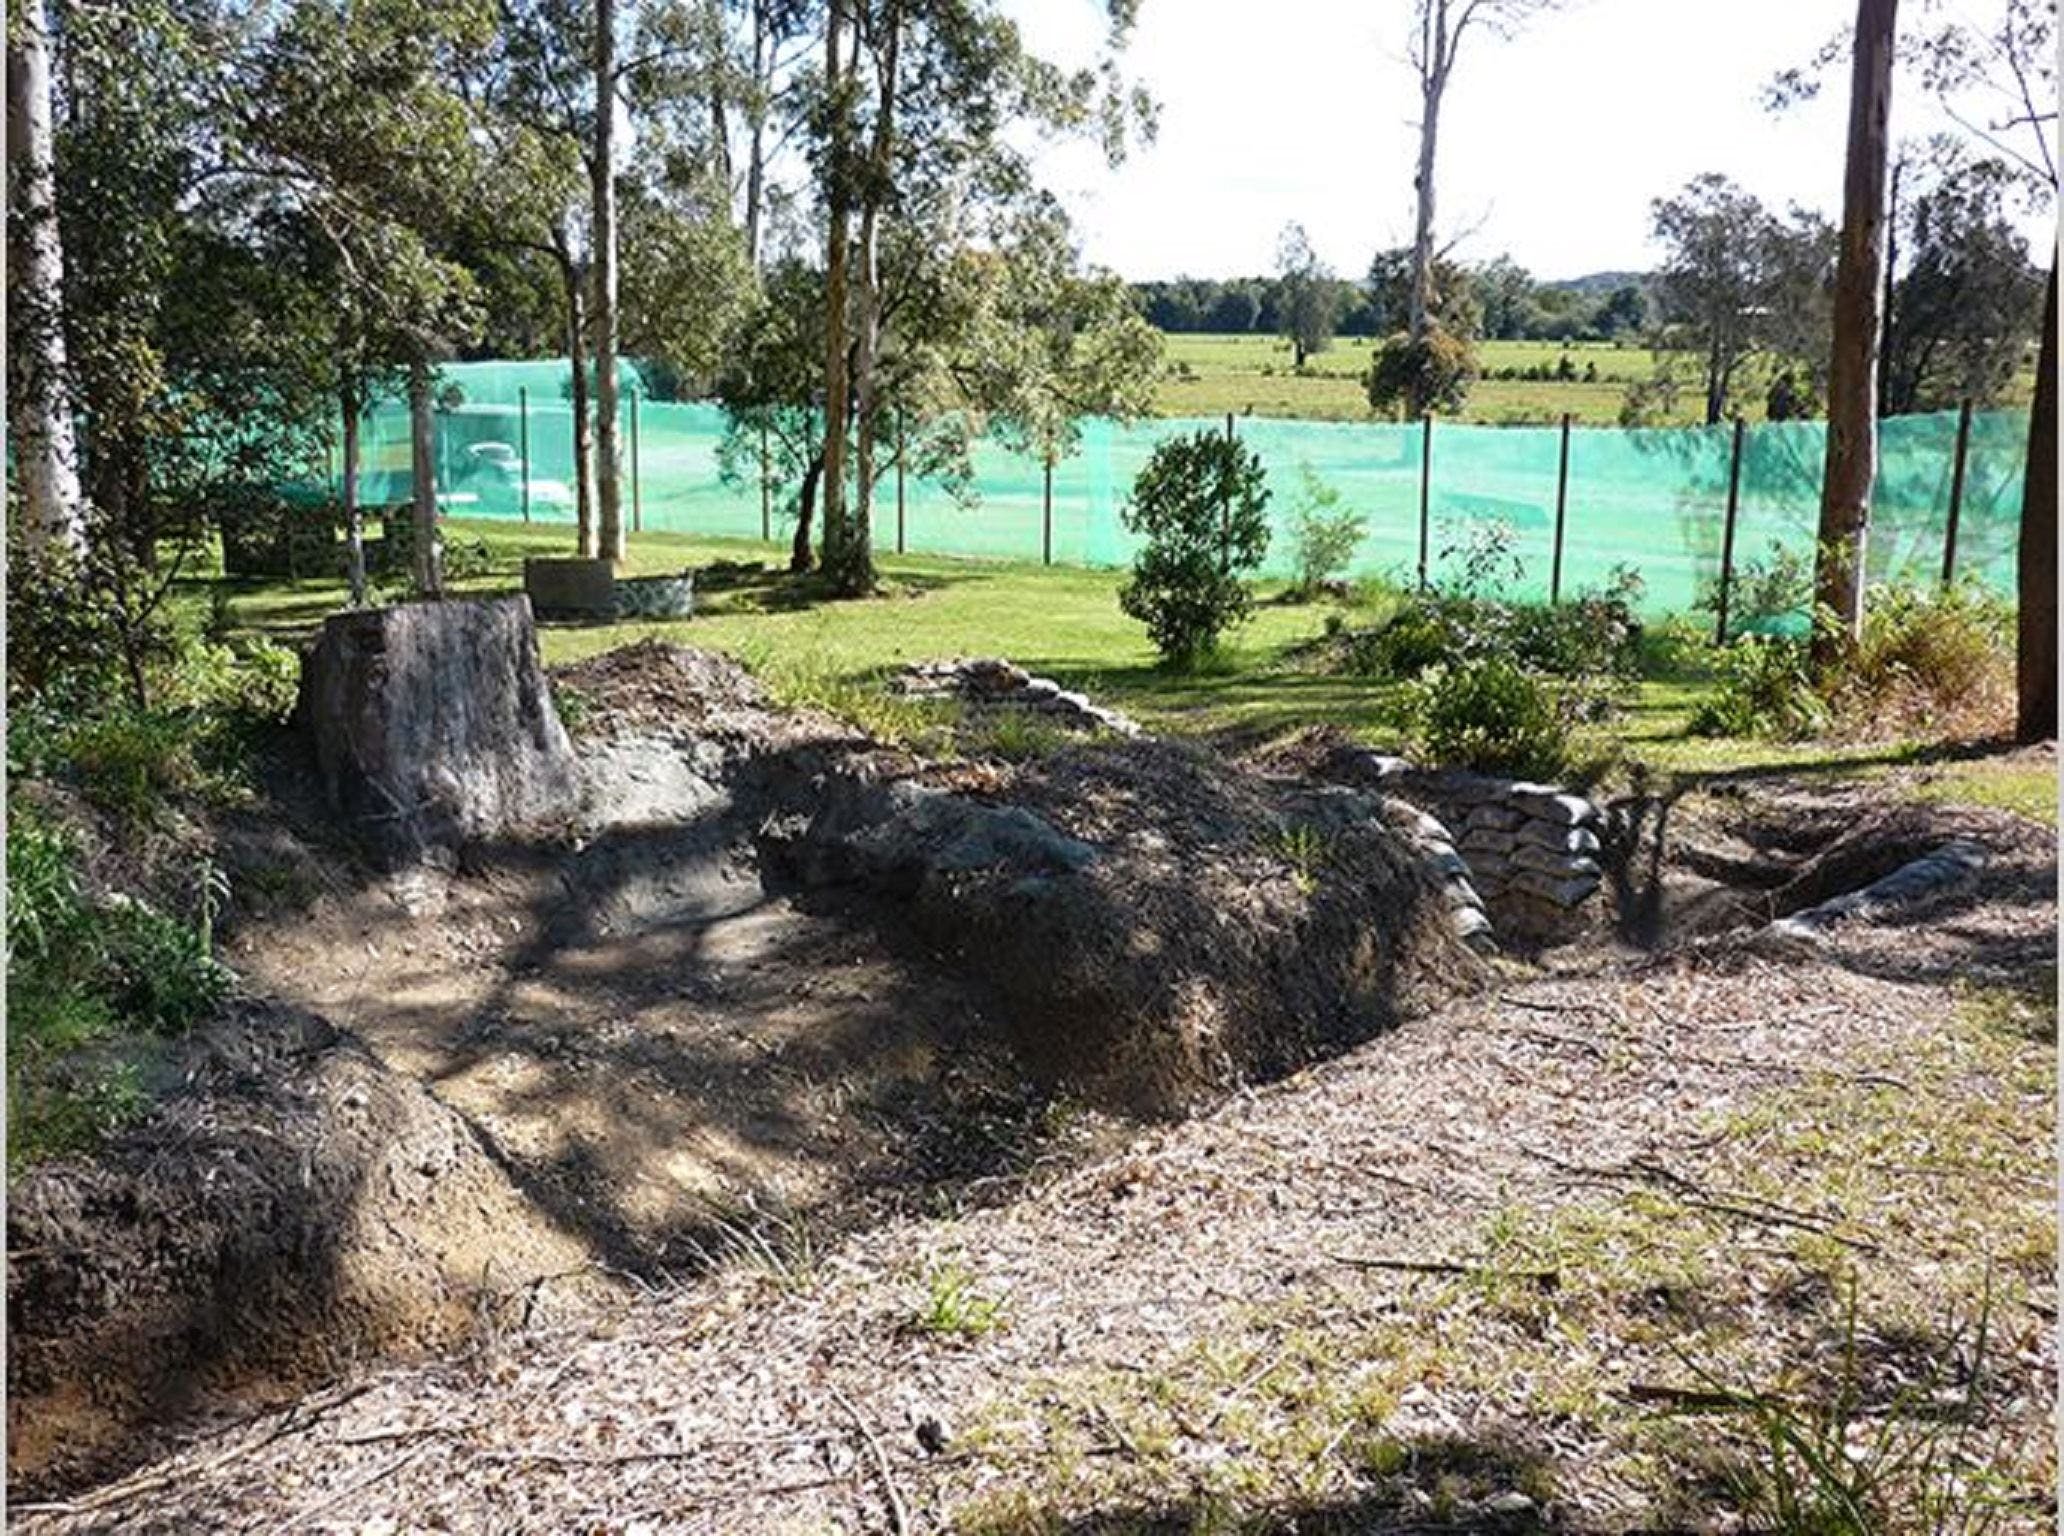 Tactical Paintball Games - Accommodation Brunswick Heads